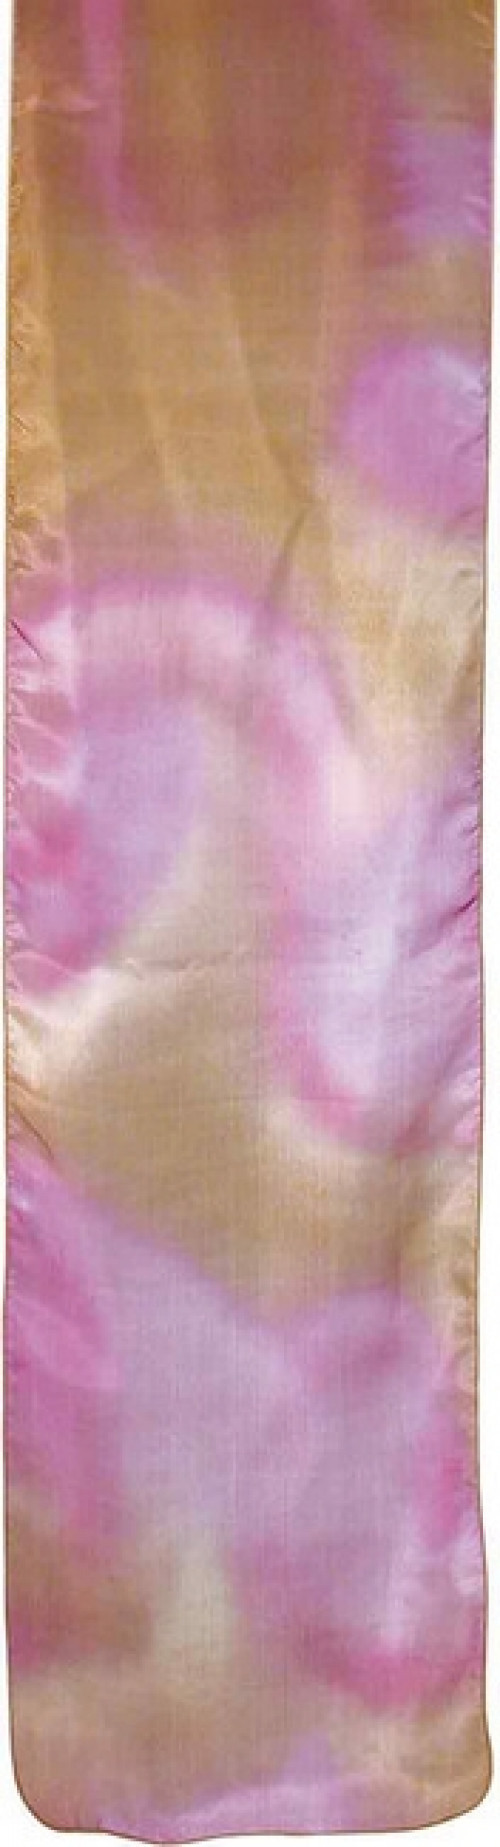 Beautiful woman's fashion 100% pure silk scarves from the Holy Land. This scarf with it's glorious hand painted gold and pink design is a creation of world renowned Israeli artist Yair Emanuel. But every wife who prays or prophesies with her head uncovere #silk